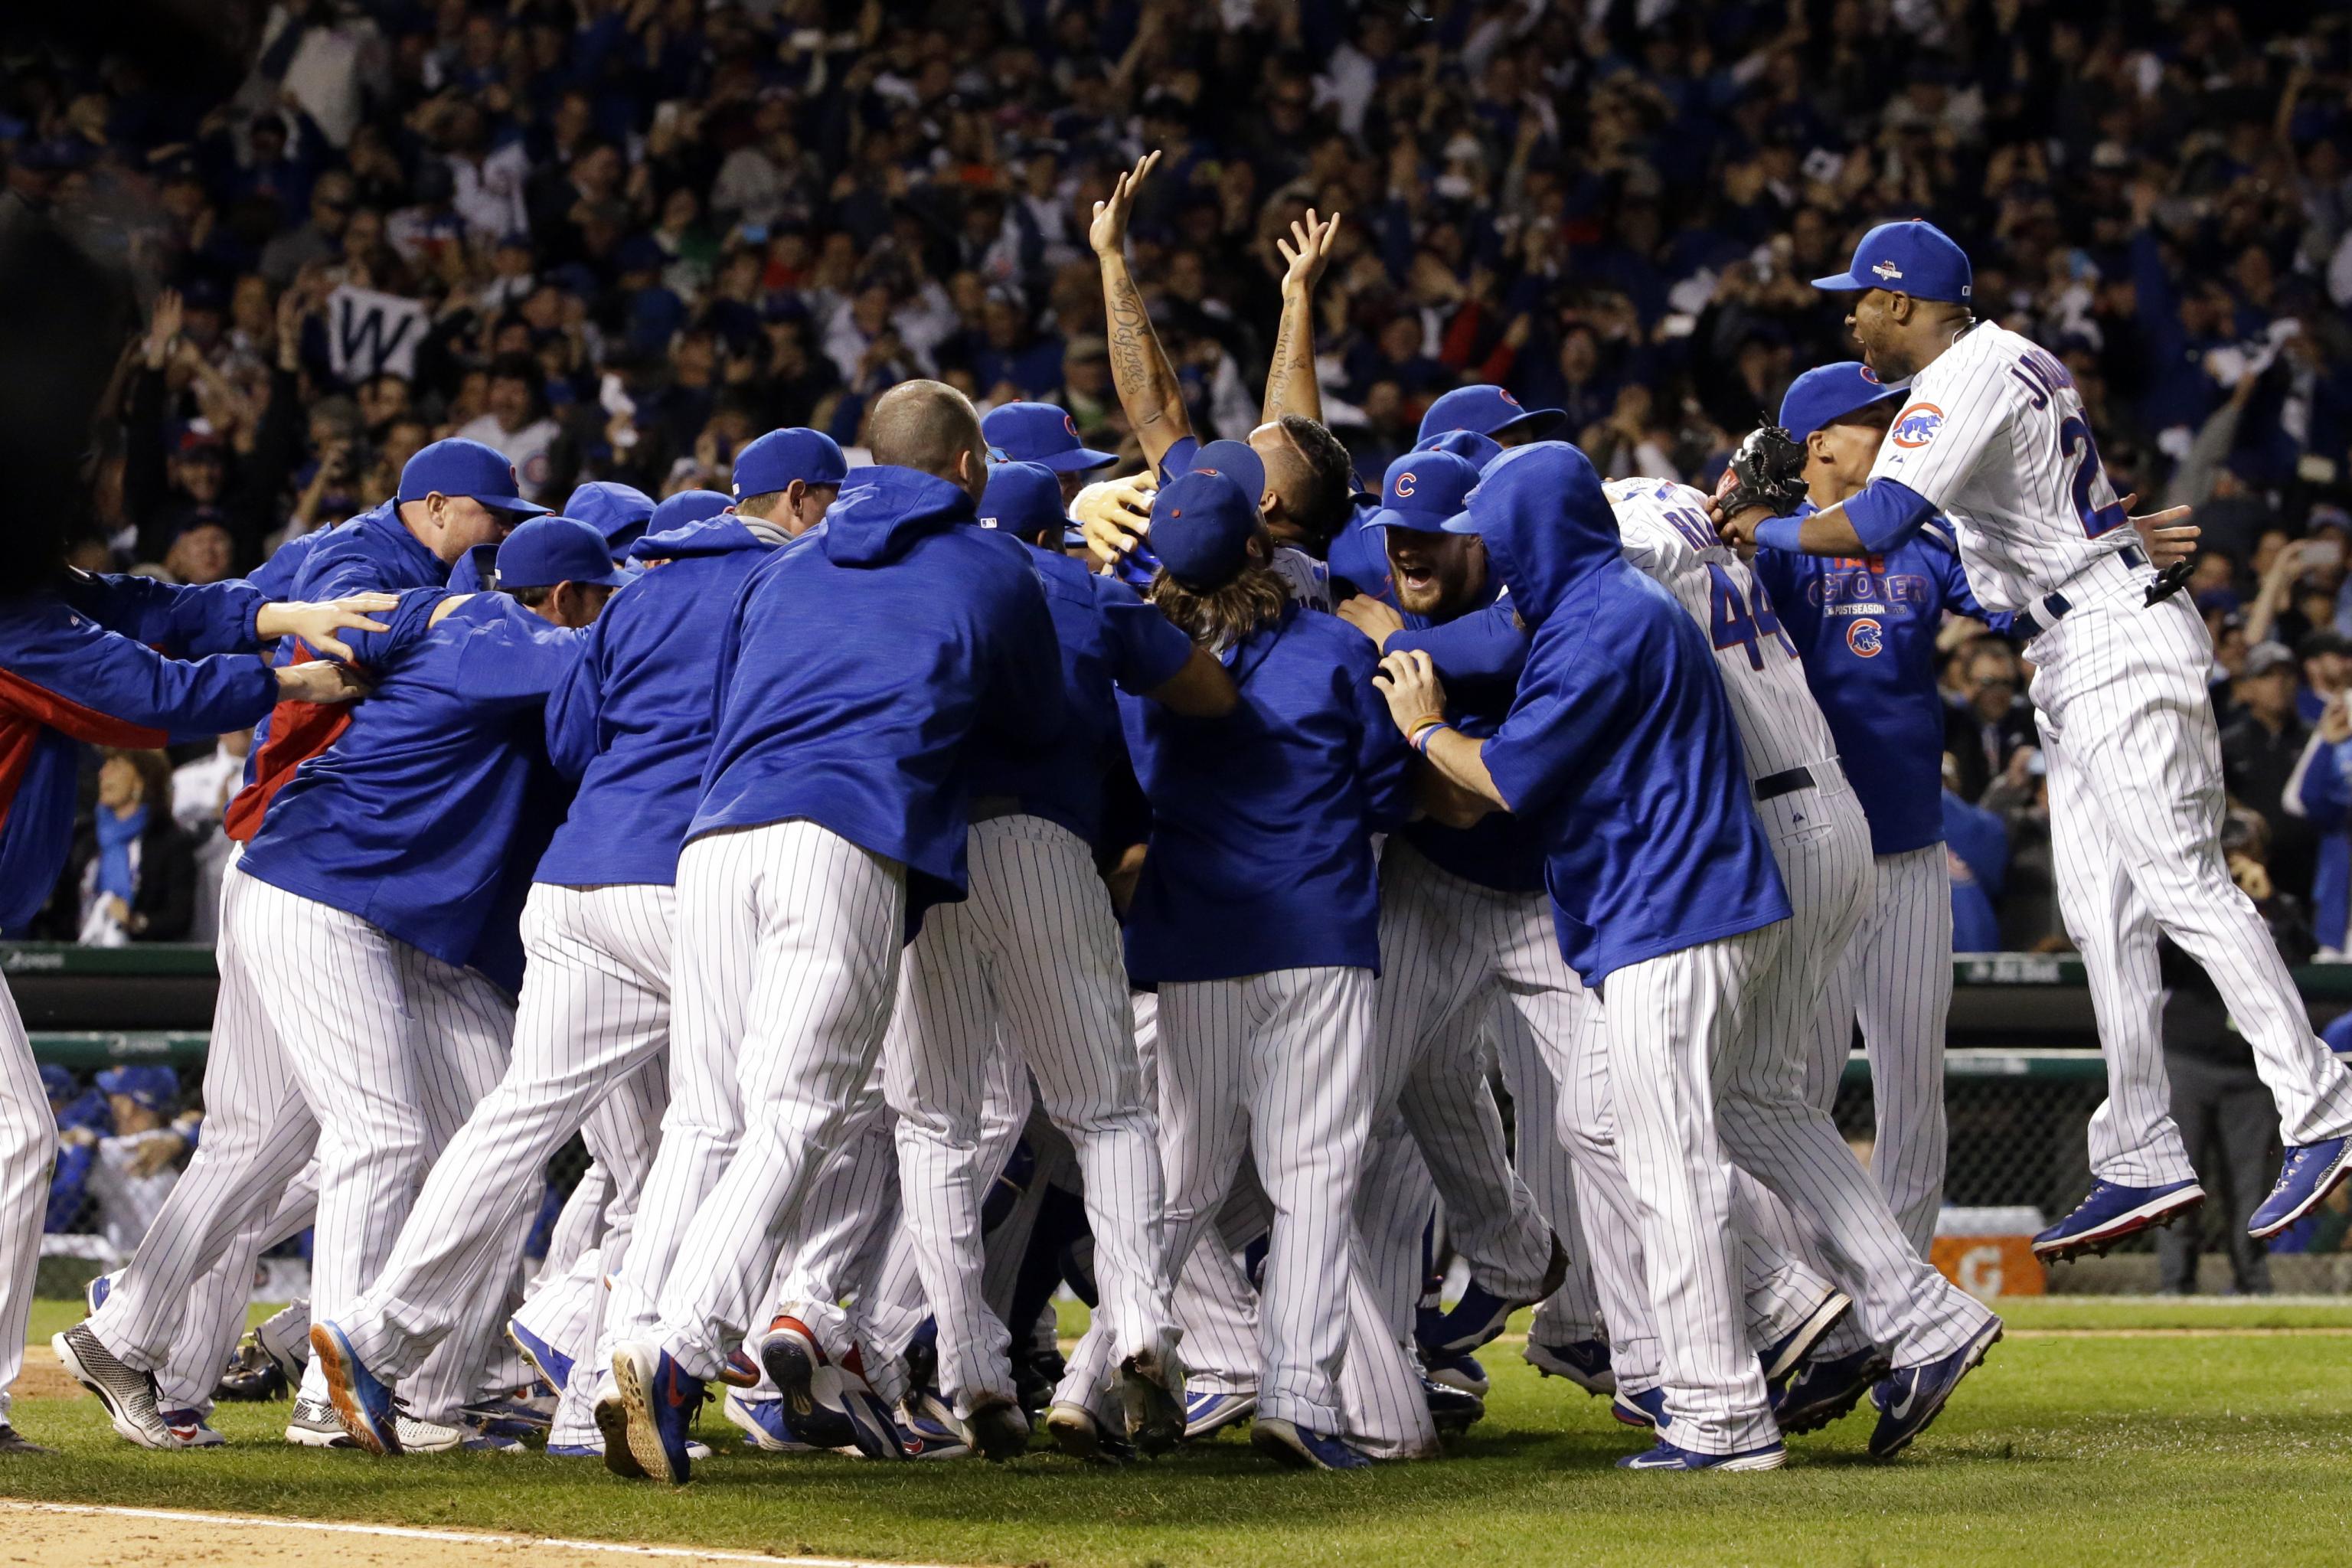 Social media reaction to Chicago Cubs' first World Series title since 1908